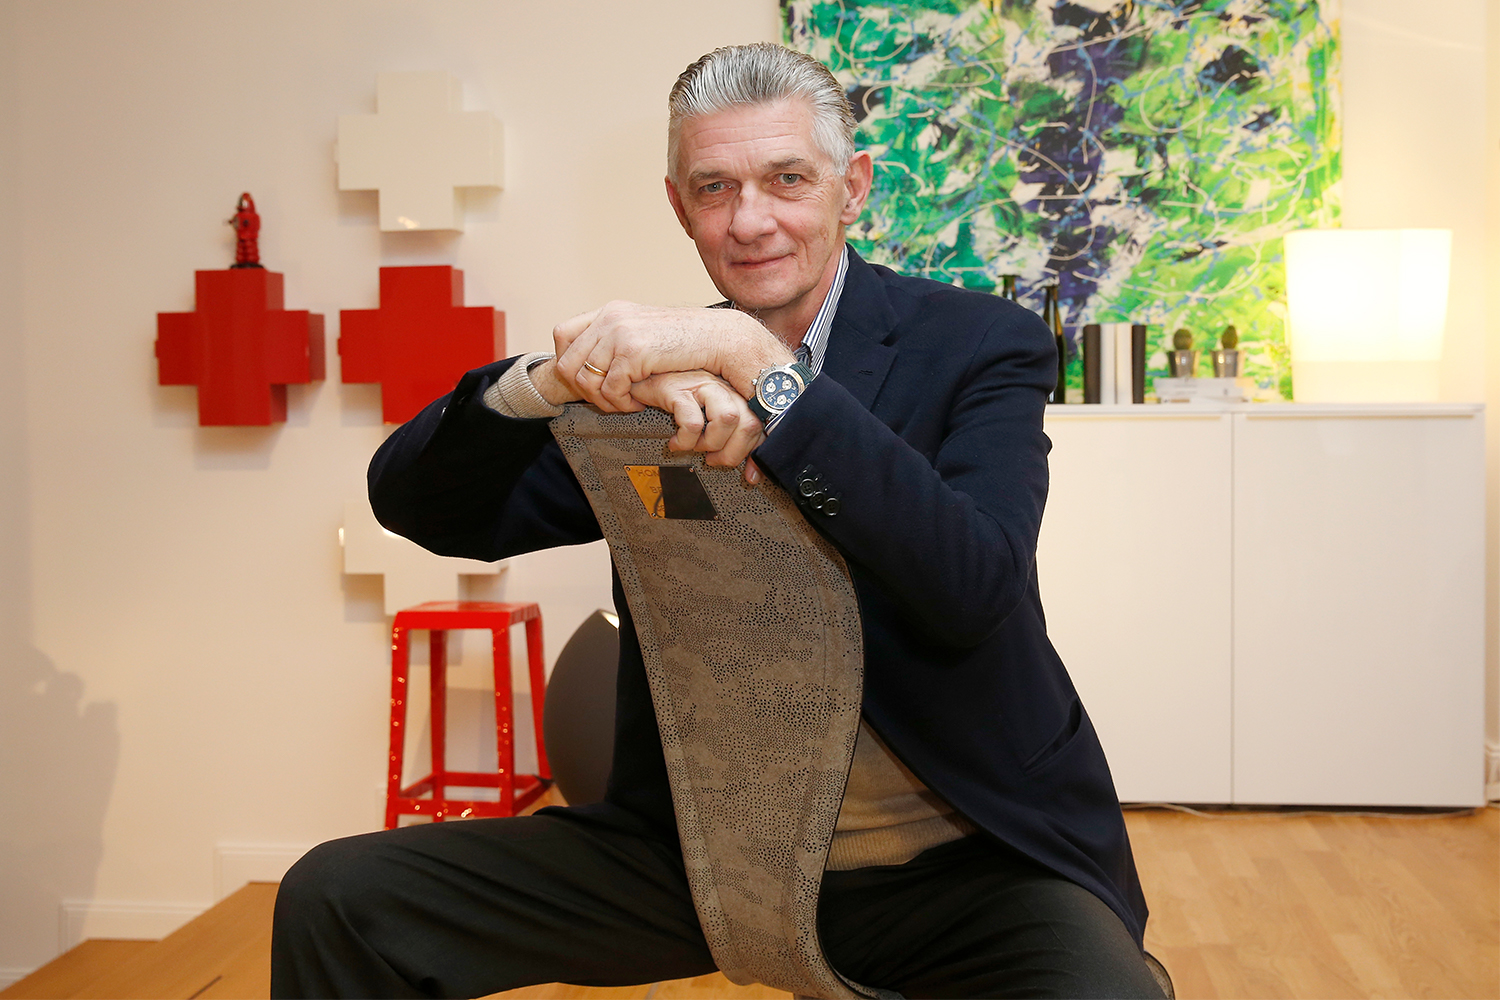 Giulio Cappellini at the Cappellini flagship store opening in Berlin, Germany, on March 12, 2014.